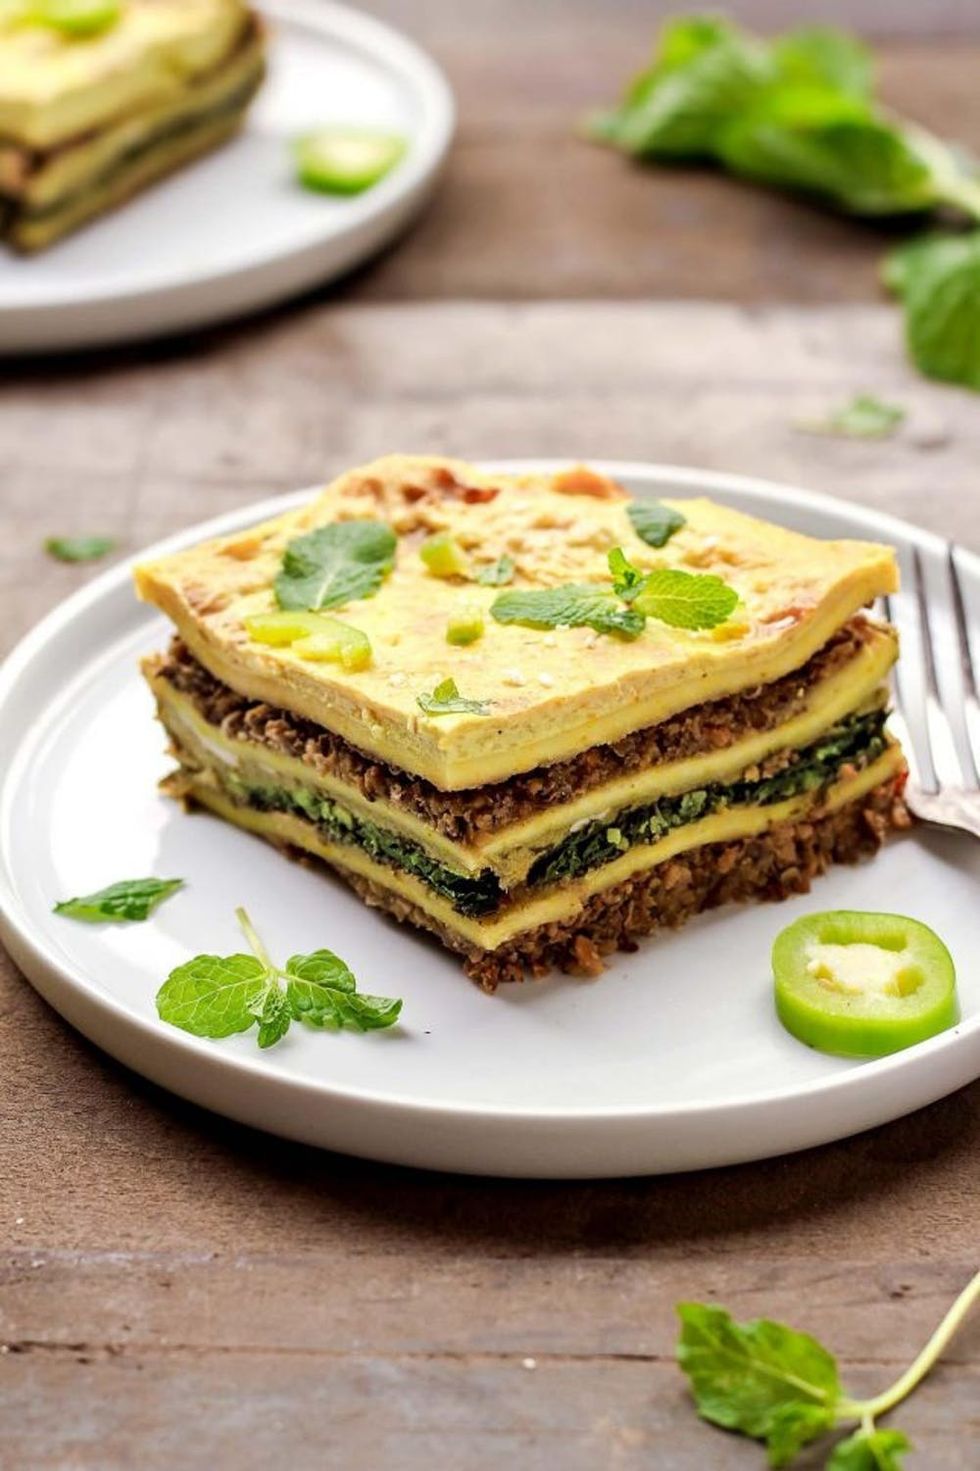 18 Swanky Recipes To Throw The Most Epic Vegetarian Dinner Party On Meatless Monday Brit Co